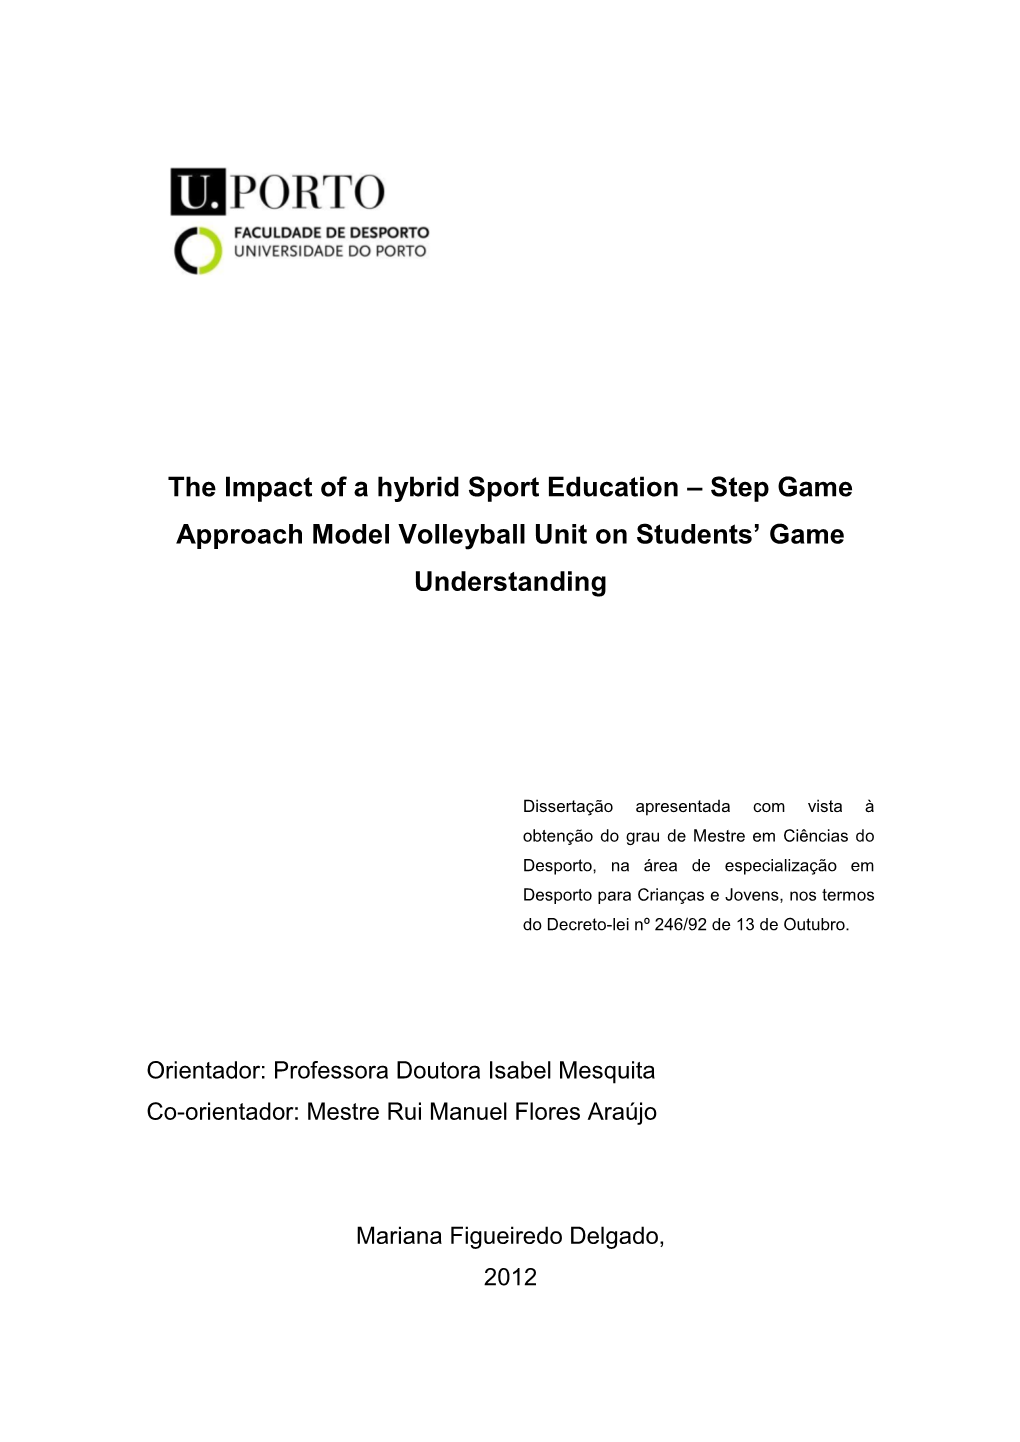 The Impact of a Hybrid Sport Education – Step Game Approach Model Volleyball Unit on Students’ Game Understanding